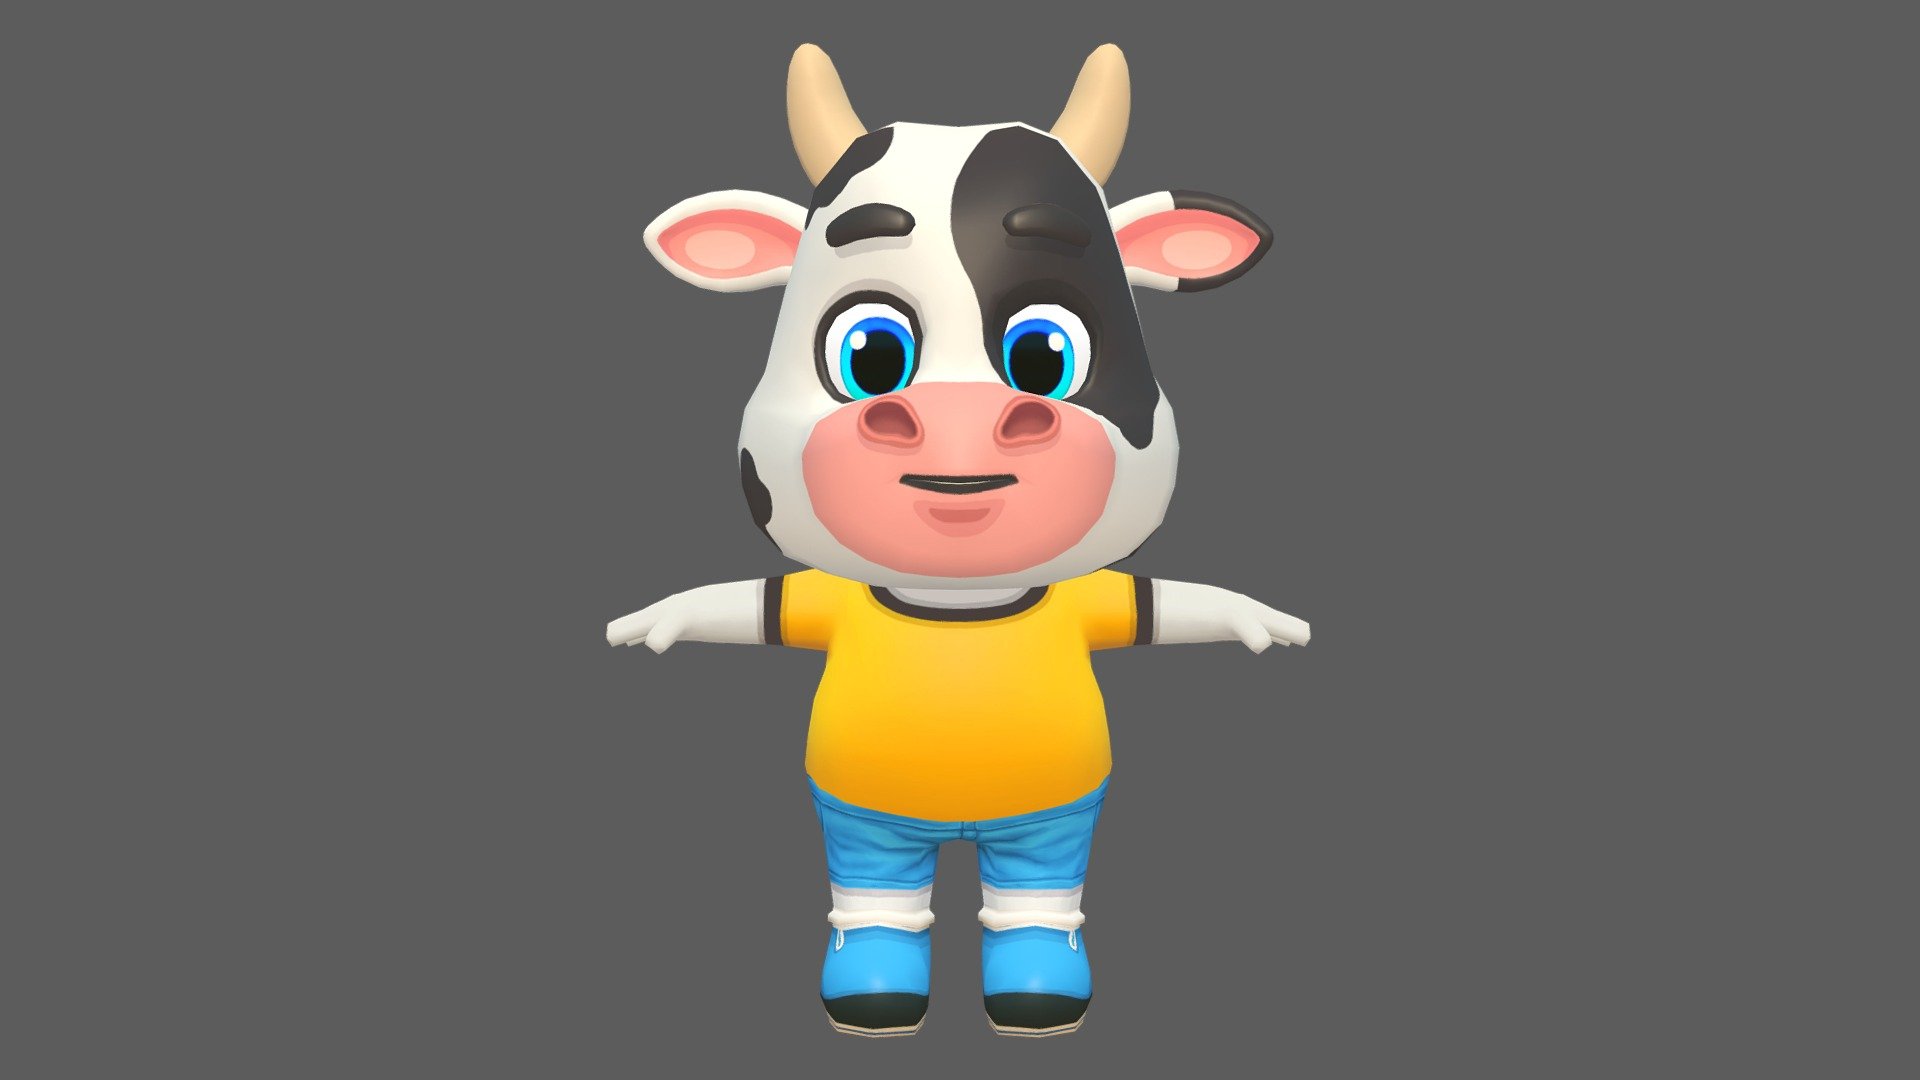 Cow character for games and animations. The model is game ready and compatible with game engines.

Included Files:




Maya (Source files, Rig) for Unity and Unreal (.ma, .mb) - 2015 - 2020

FBX for Unity - 2014 - 2020

FBX for Unreal - 2014 - 2020

OBJ

Unity Project - Preconfigured Humanoid Rig

Supports Humanoid Animation:




Preconfigured Humanoid Rig &amp; Animation Clips

Unity Humanoid compatible FBX

Mixamo

The model is low poly with four texture resolutions 4096x4096, 2048x2048, 1024x1024 &amp; 512x512.

The package includes 20 Animations:




Walk

Run

Idle

Jump

Leap left

Leap right

Death

Skidding

Roll

Crash

Power up

Whirl

Whirl jump

Waving in air

Backwards run

Dizzy

Gum Bubble

Gliding

Waving

Looking behind

The model is fully rigged and can be easily animated or modified if required.

The model is game ready at:




4024 Polys

4023 Verts

UV mapped with non-overlapping UV's. The shadows and lights are baked in the texture 3d model